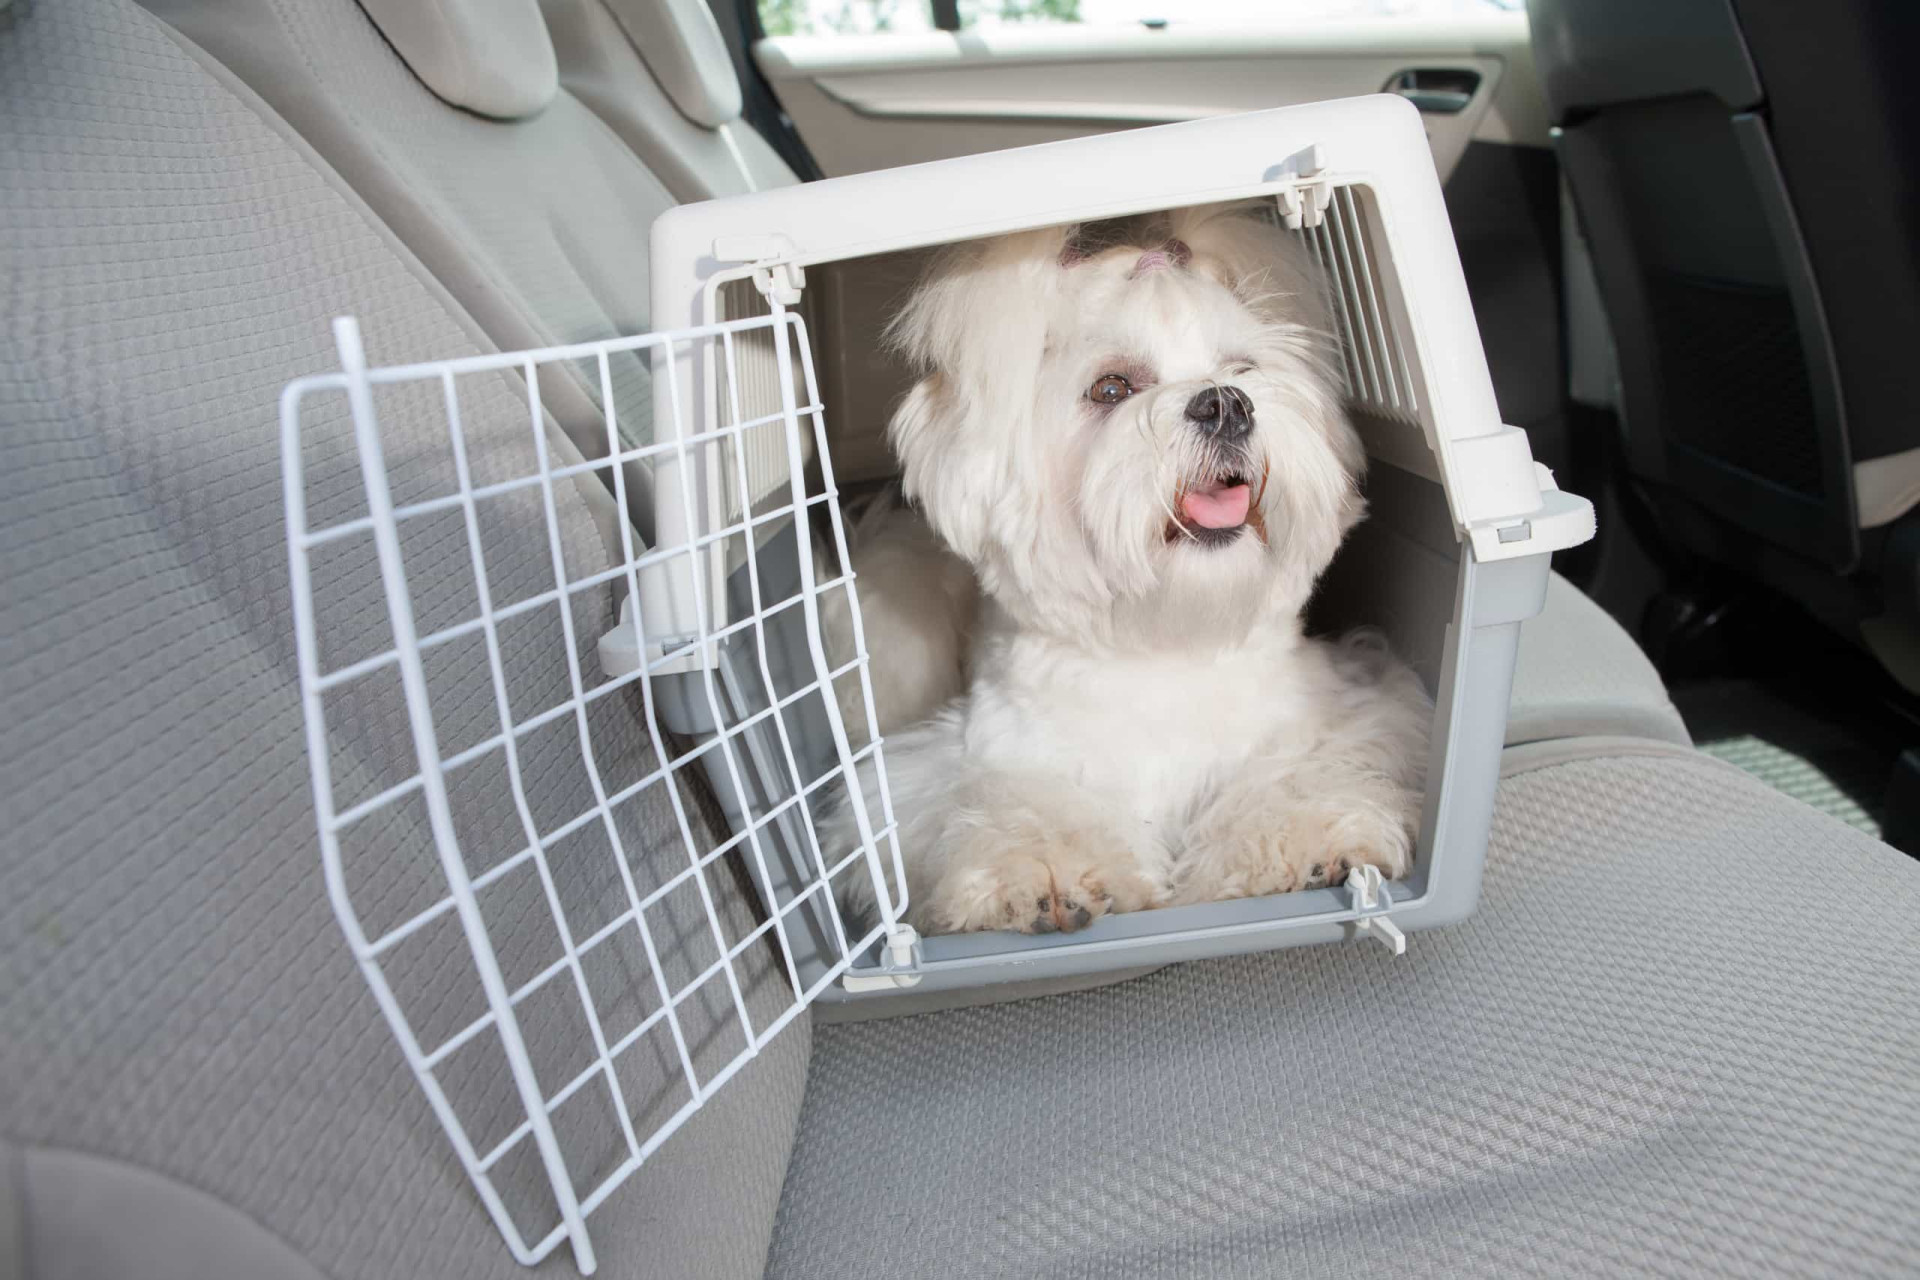 <p>A crate is another option to transport your dog. These can usually be secured with a seatbelt or luggage straps. It’s always a good idea to bring one with you if your dog is used to it, even if not used in the car specifically.</p><p><a href="https://www.msn.com/en-us/community/channel/vid-7xx8mnucu55yw63we9va2gwr7uihbxwc68fxqp25x6tg4ftibpra?cvid=94631541bc0f4f89bfd59158d696ad7e">Follow us and access great exclusive content every day</a></p>